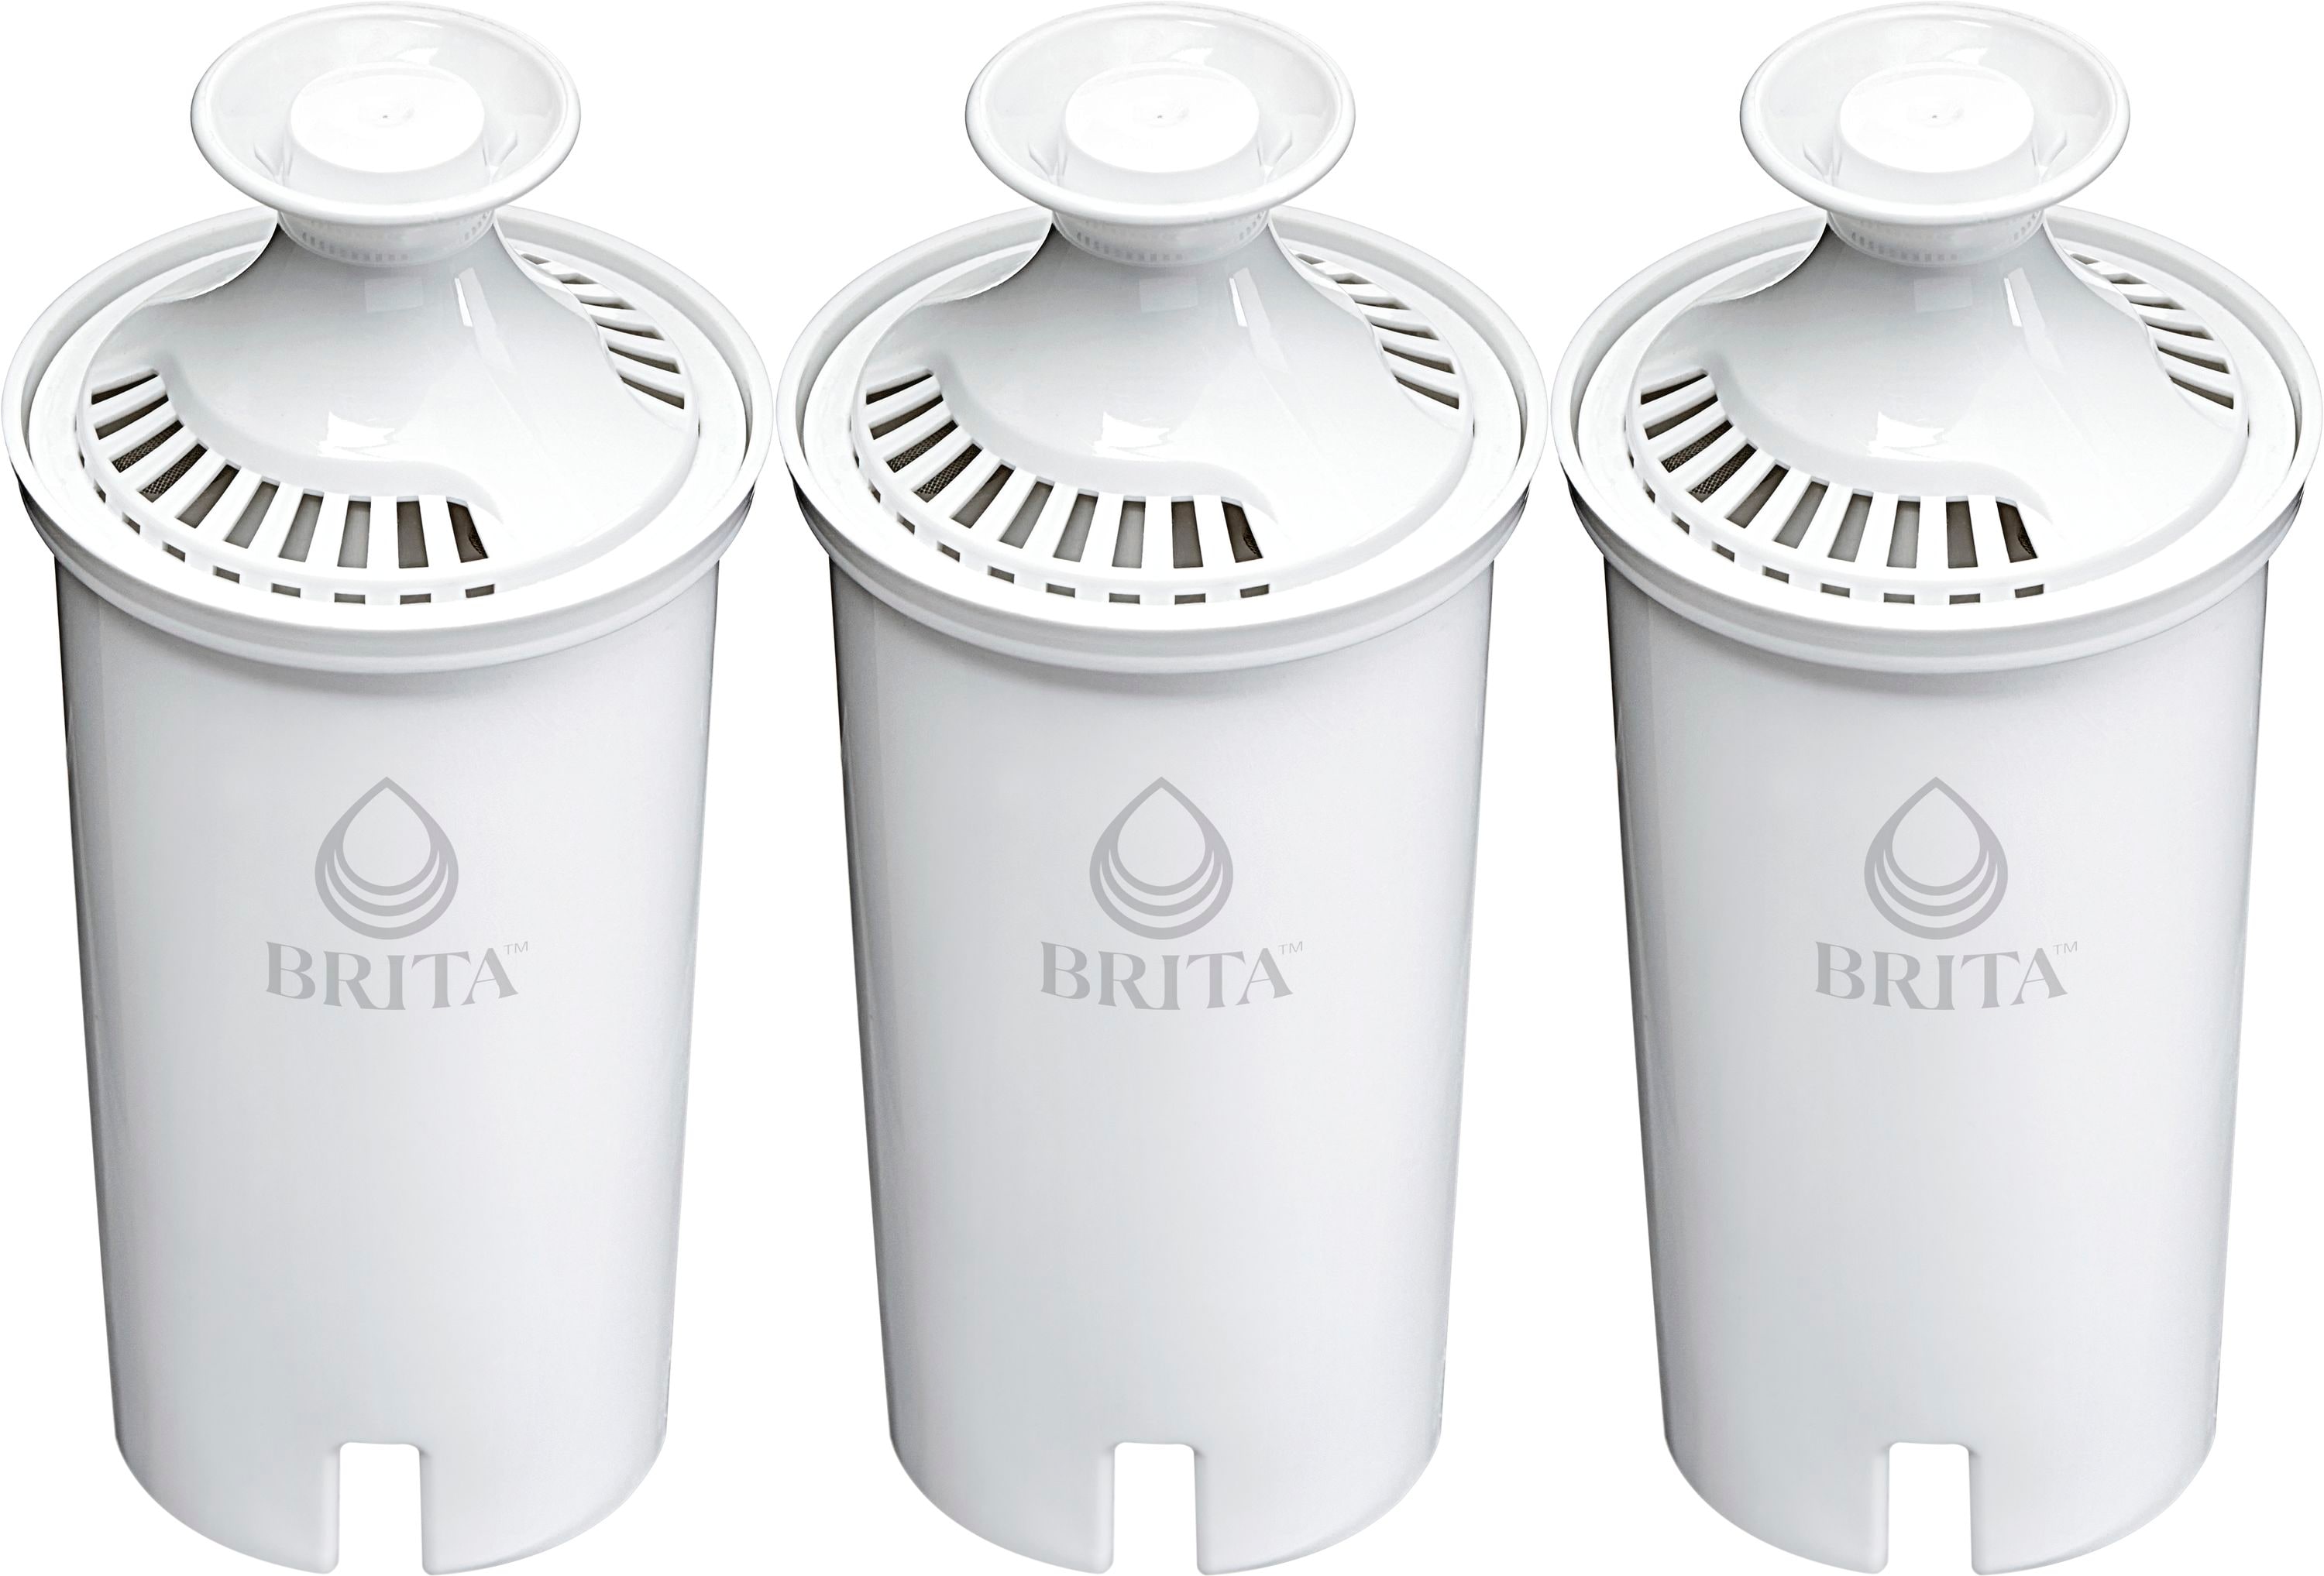  Brita Filters for Maxtra+ Water Filter Jug,  Plastic/Carbon/Resin 3 Filtri Bianco : Home & Kitchen